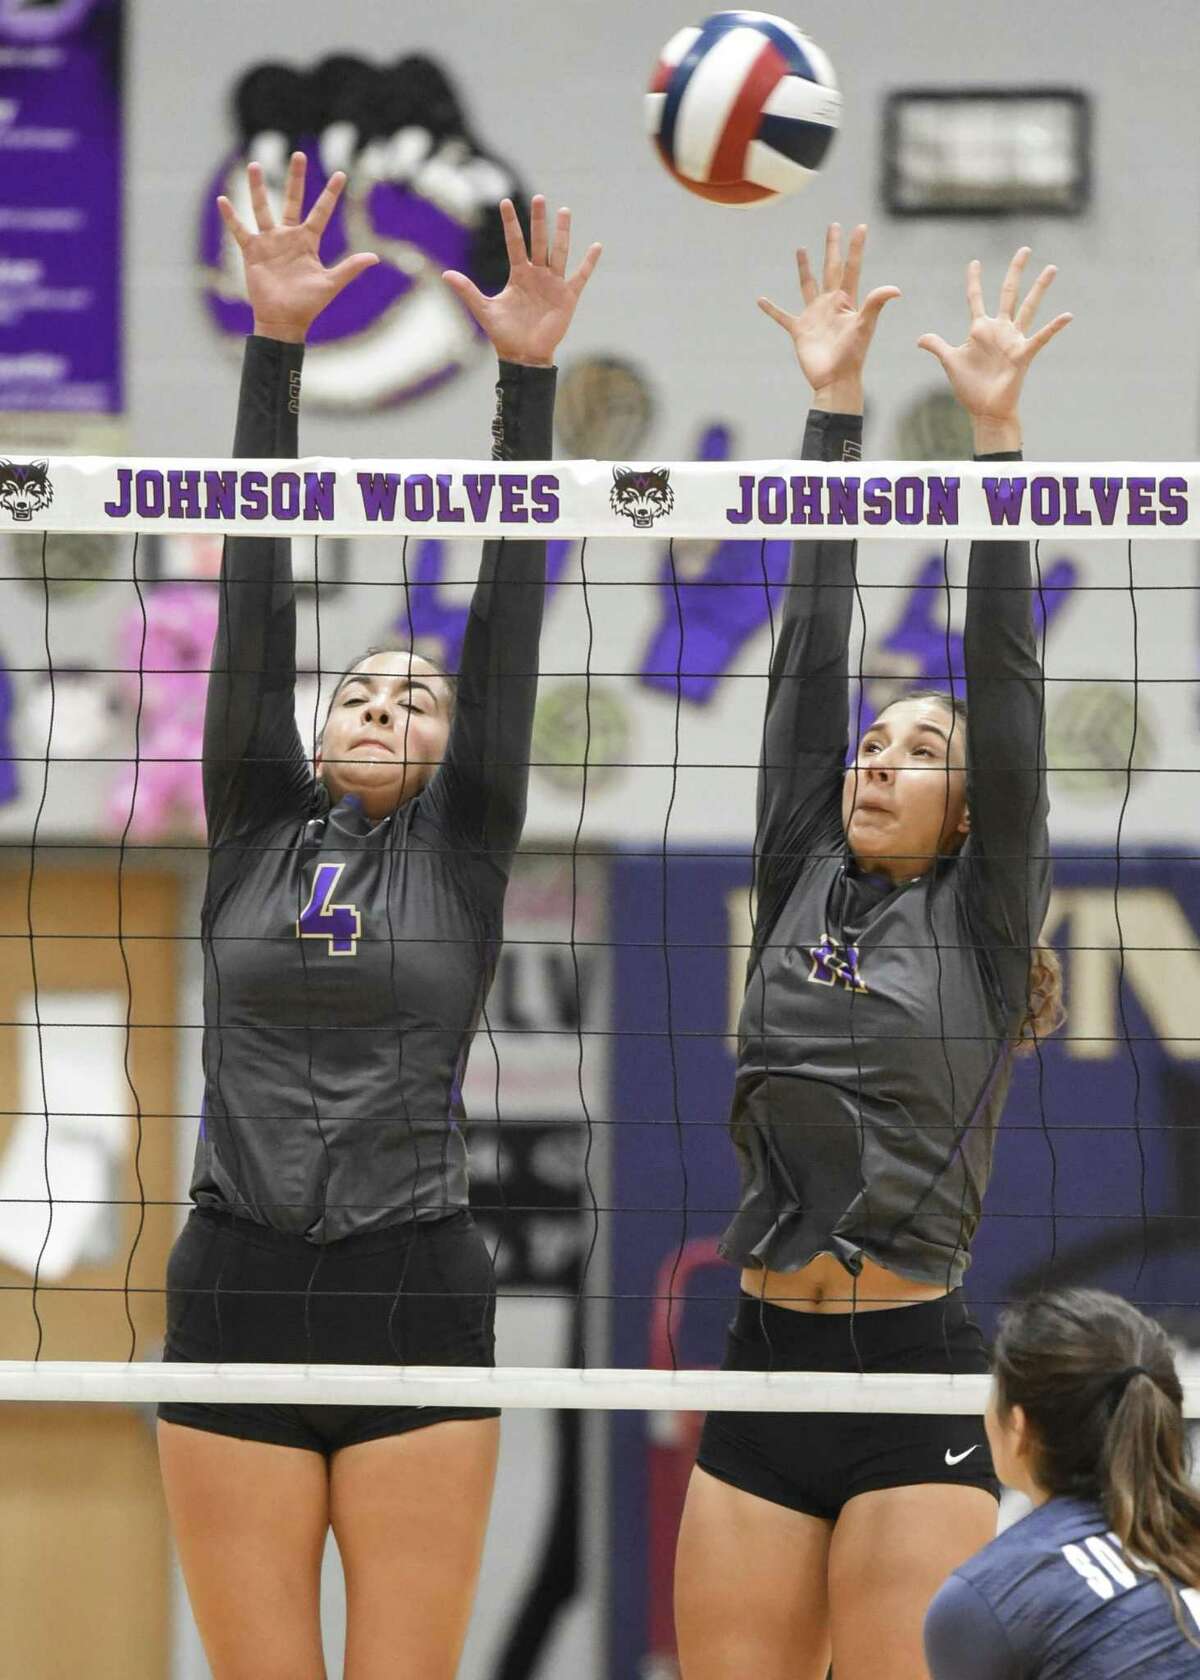 Isabel Martinez, Priscilla Castillo and LBJ rolled 3-0 (25-17, 25-13, 25-11) Tuesday over Pharr-San Juan-Alamo Southwest. The Lady Wolves are home again at 7 p.m. Friday to open district play against Alexander.